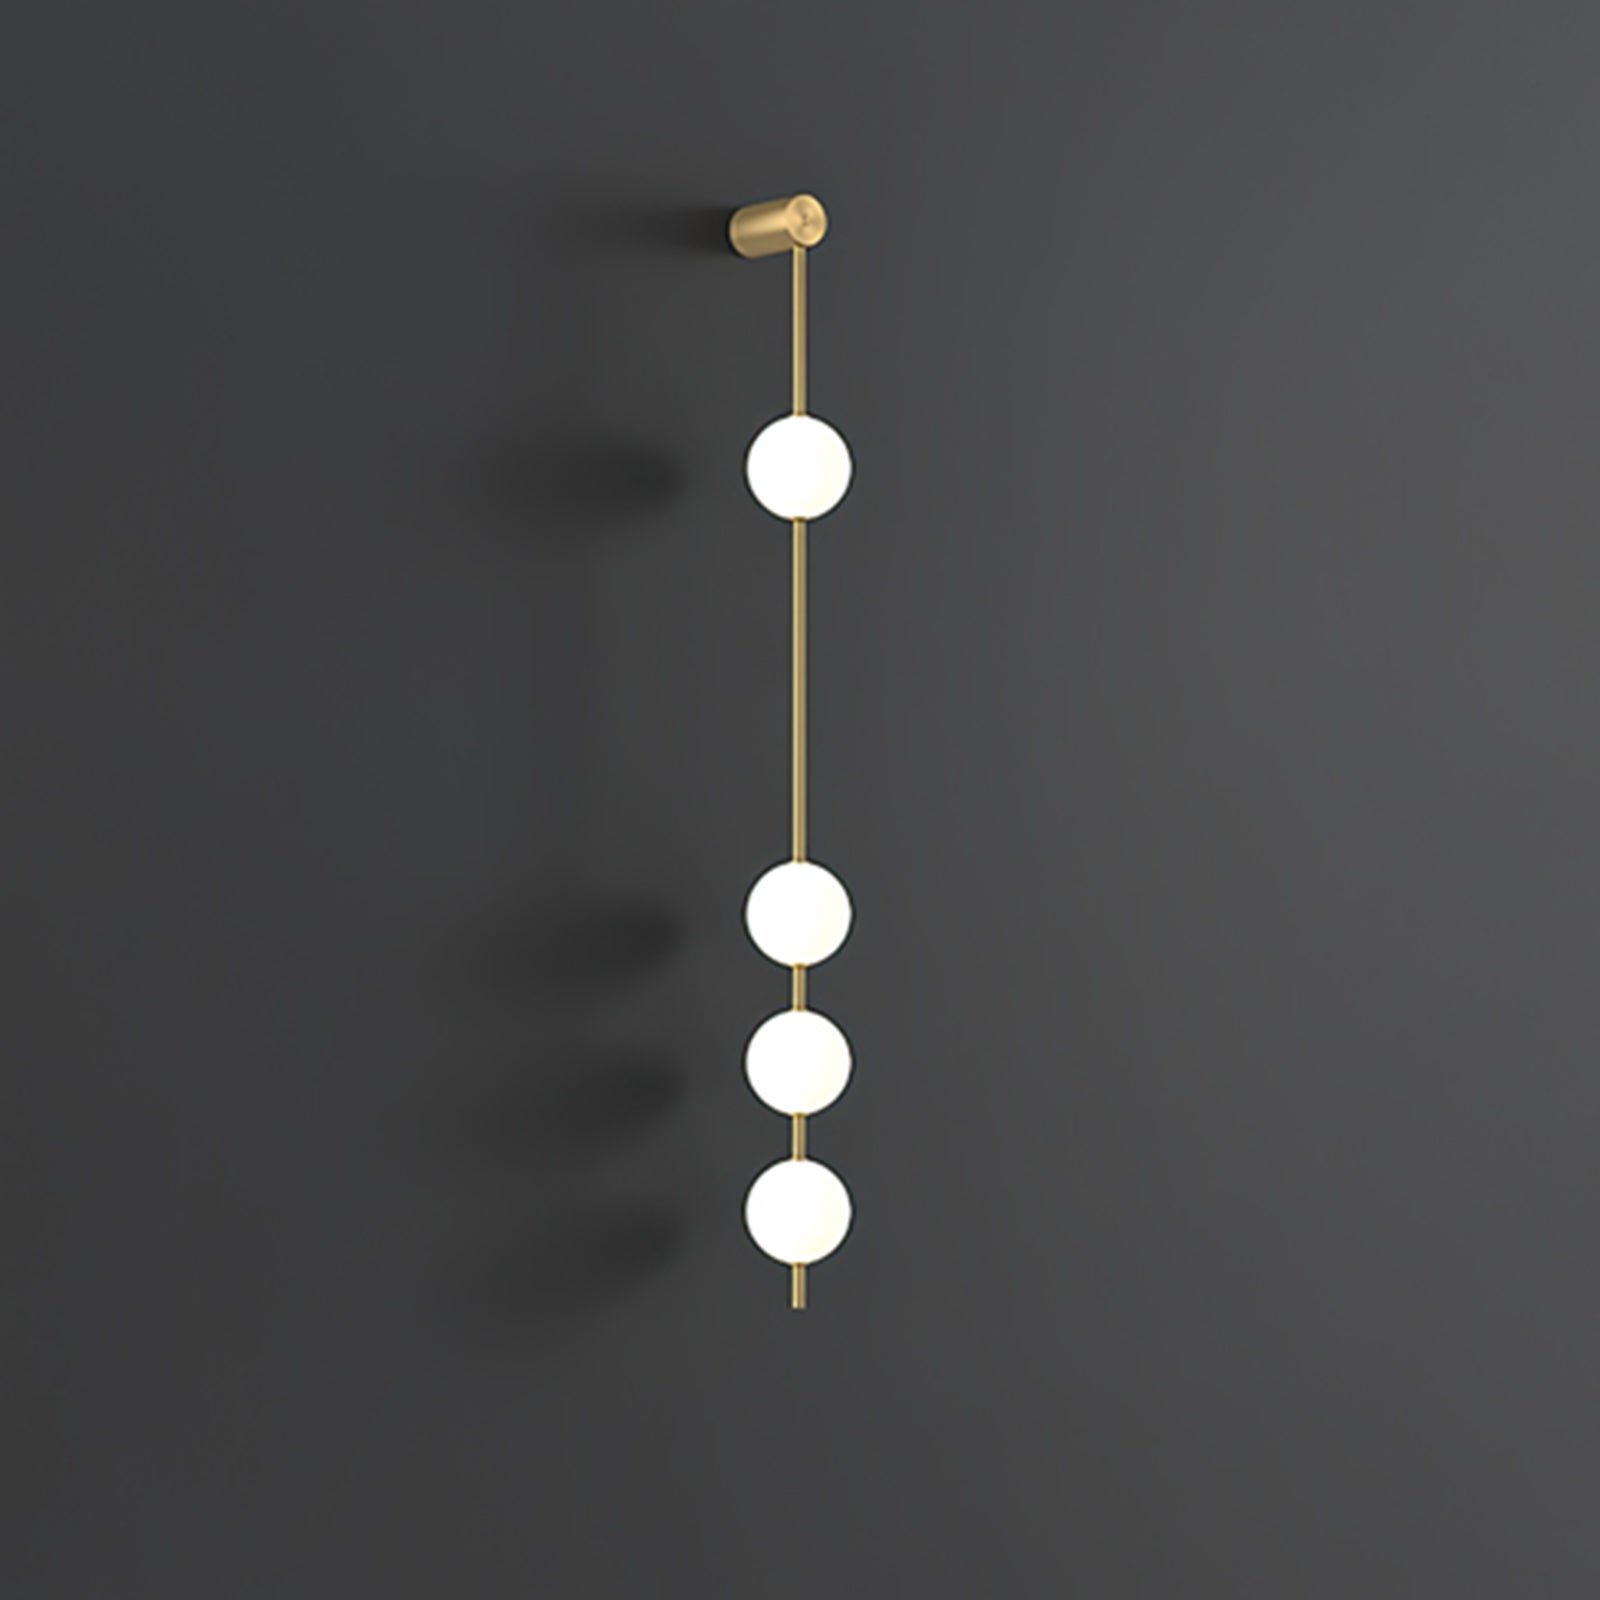 Vertical Arrangement Wall Lamp with 4 Lamps: 4.7 inches Diameter x 51.2 inches Height (12cm x 130cm), Available in Brass or White Finish, emits Warm White Light